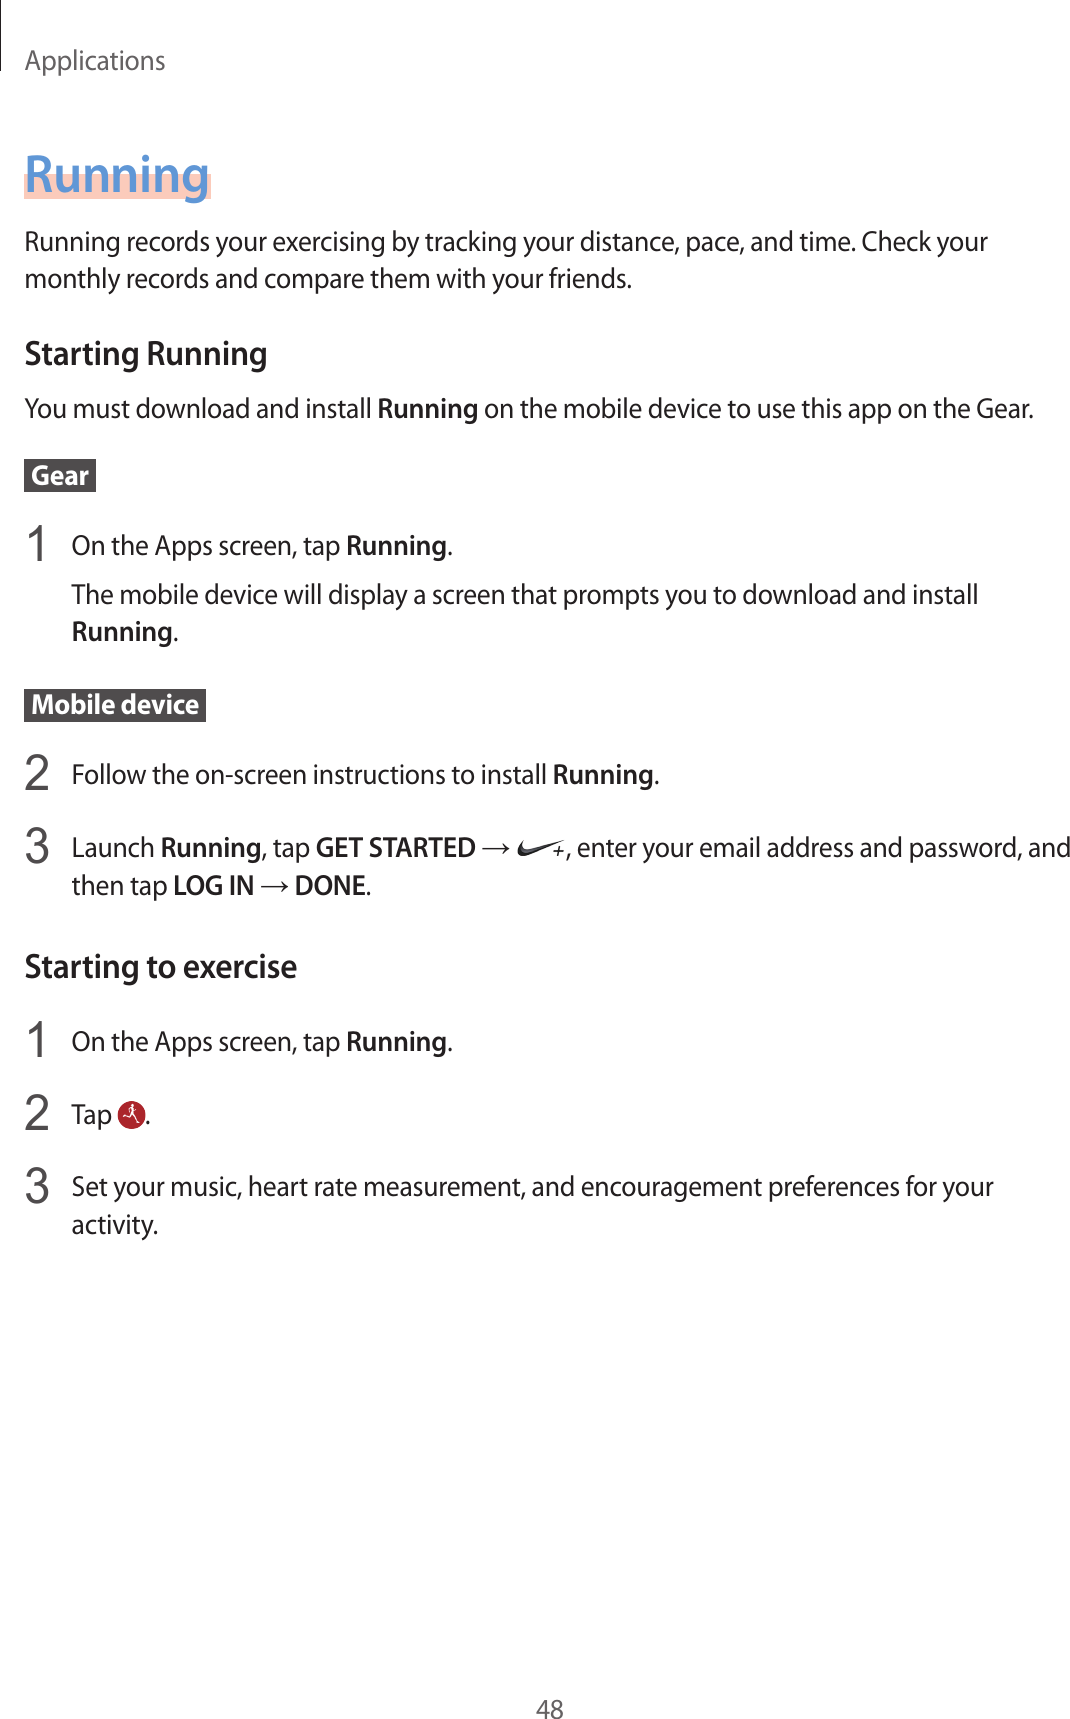 Applications48RunningRunning records your exercising by tracking your distance, pace, and time. Check your monthly records and compare them with your friends.Starting RunningYou must download and install Running on the mobile device to use this app on the Gear. Gear 1  On the Apps screen, tap Running.The mobile device will display a screen that prompts you to download and install Running. Mobile device 2  Follow the on-screen instructions to install Running.3  Launch Running, tap GET STARTED → , enter your email address and password, and then tap LOG IN → DONE.Starting to exercise1  On the Apps screen, tap Running.2  Tap  .3  Set your music, heart rate measurement, and encouragement preferences for your activity.